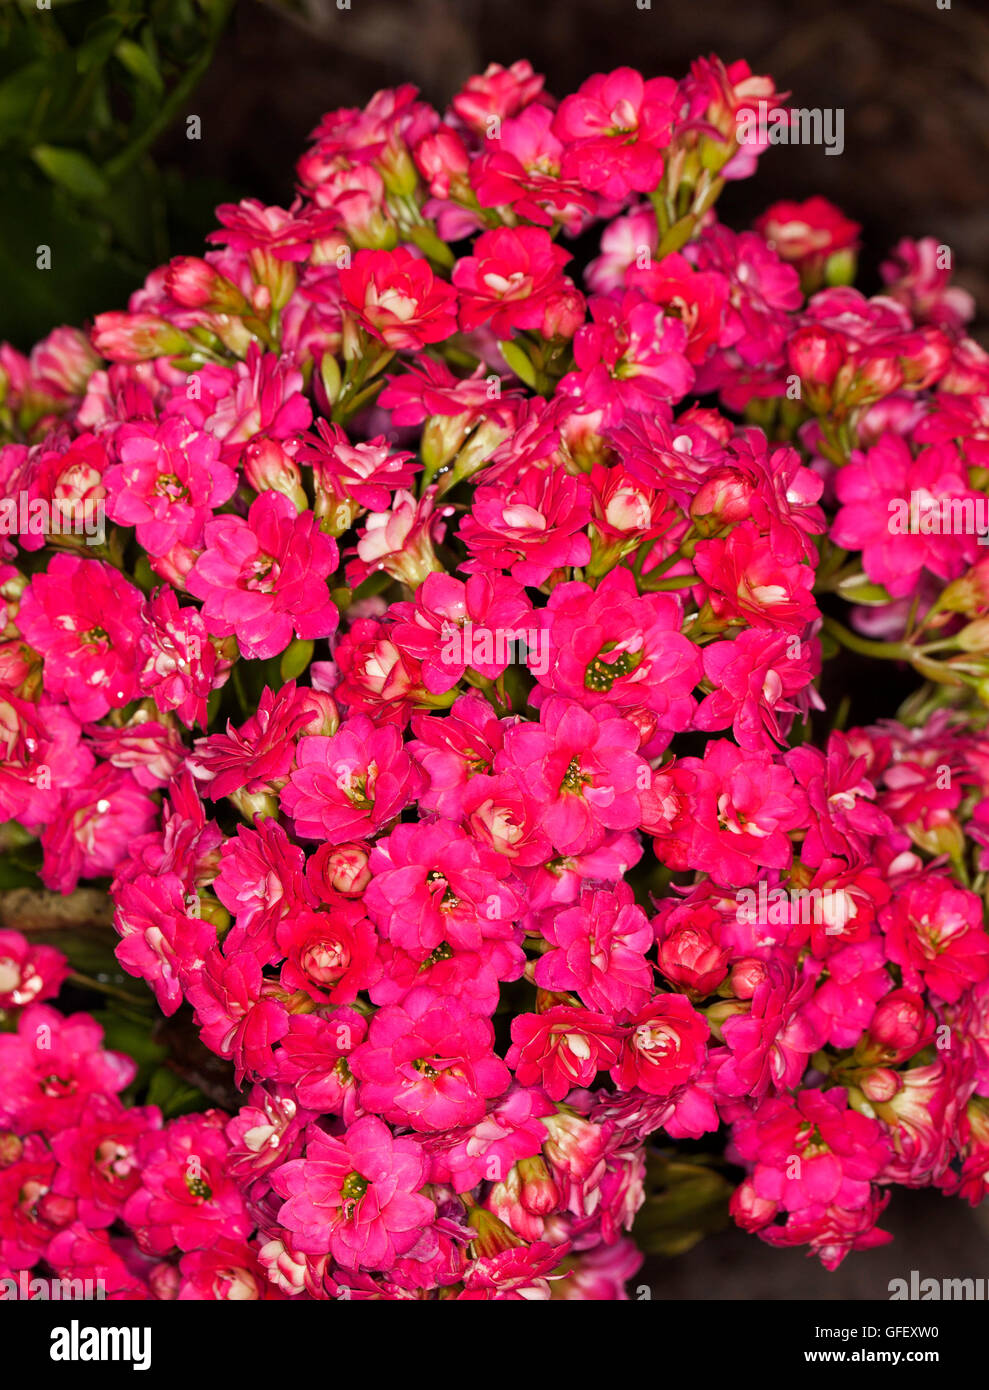 Close-up of dense cluster of vivid double red / pink flowers of succulent plant Kalanchoe blossfeldiana hybrid Stock Photo